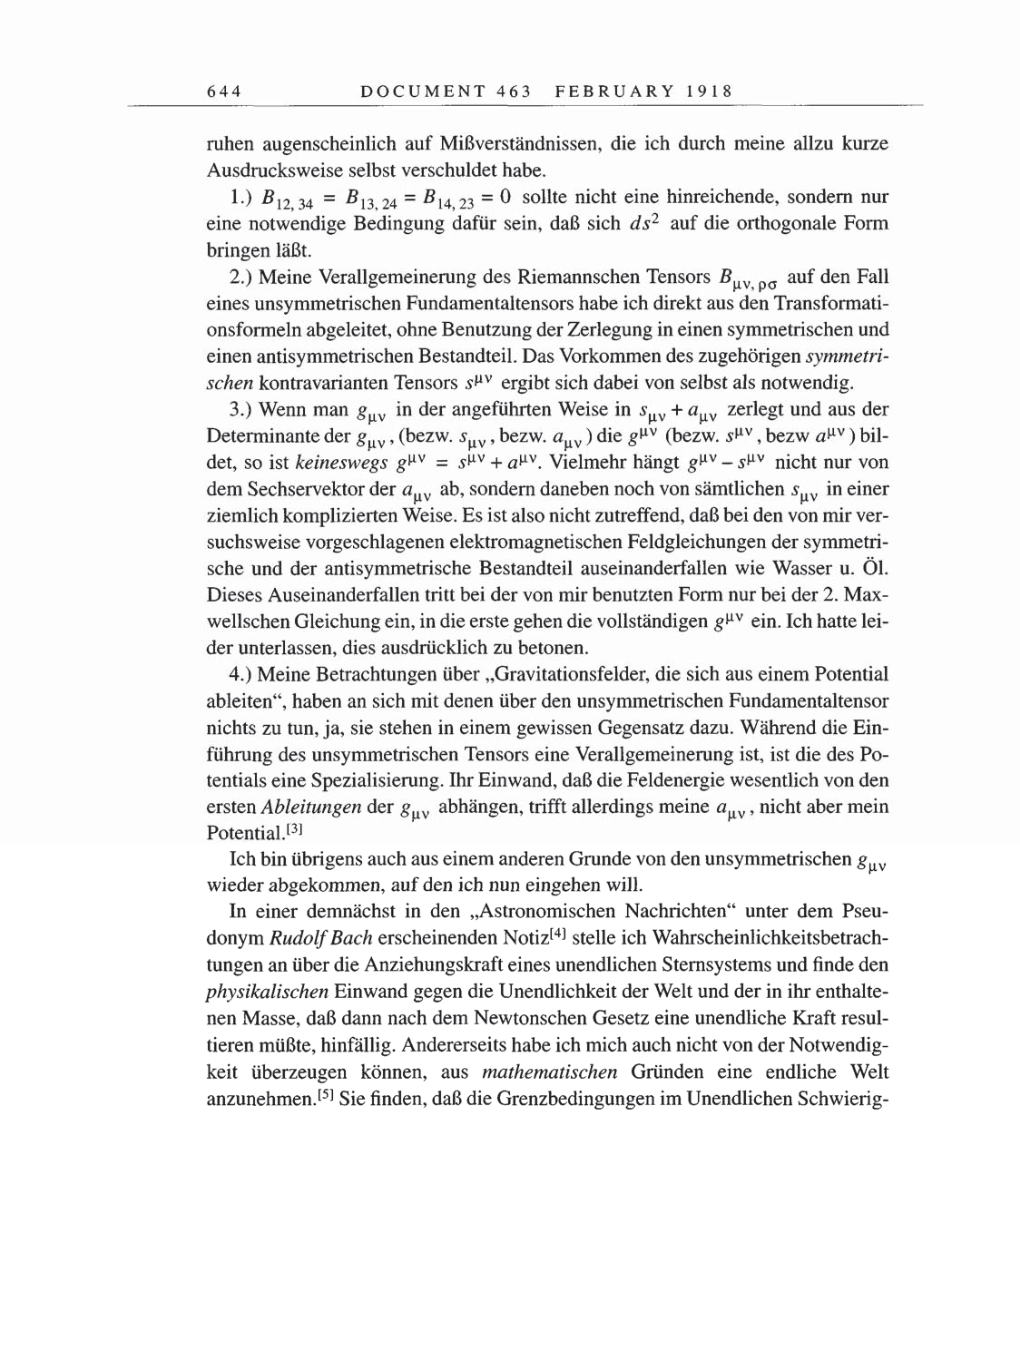 Volume 8, Part B: The Berlin Years: Correspondence 1918 page 644